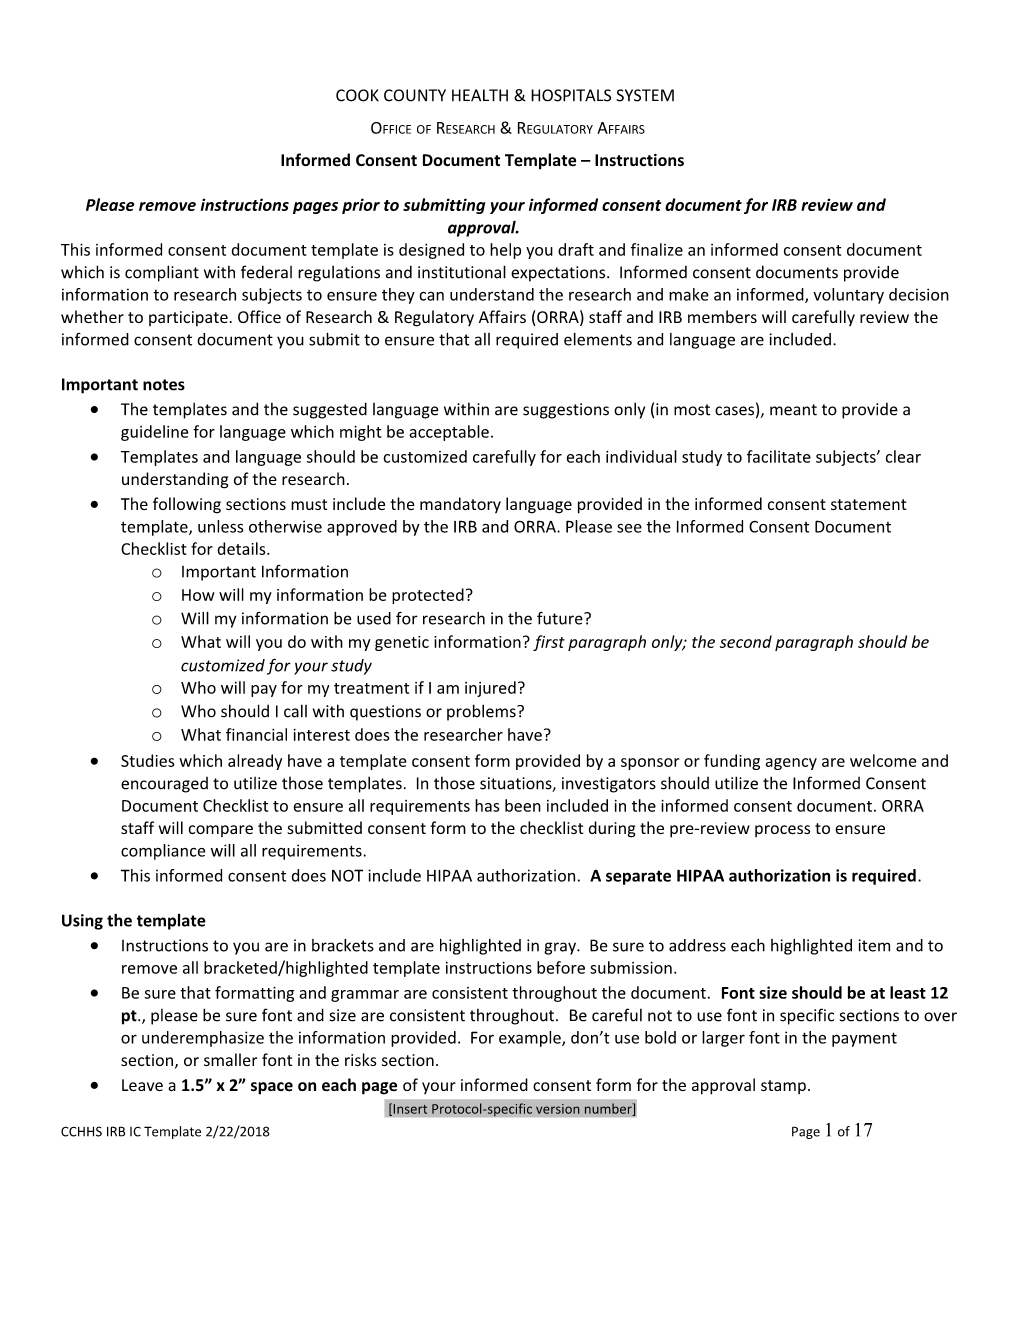 IUPUI and CLARIAN INFORMED CONSENT STATEMENT FOR